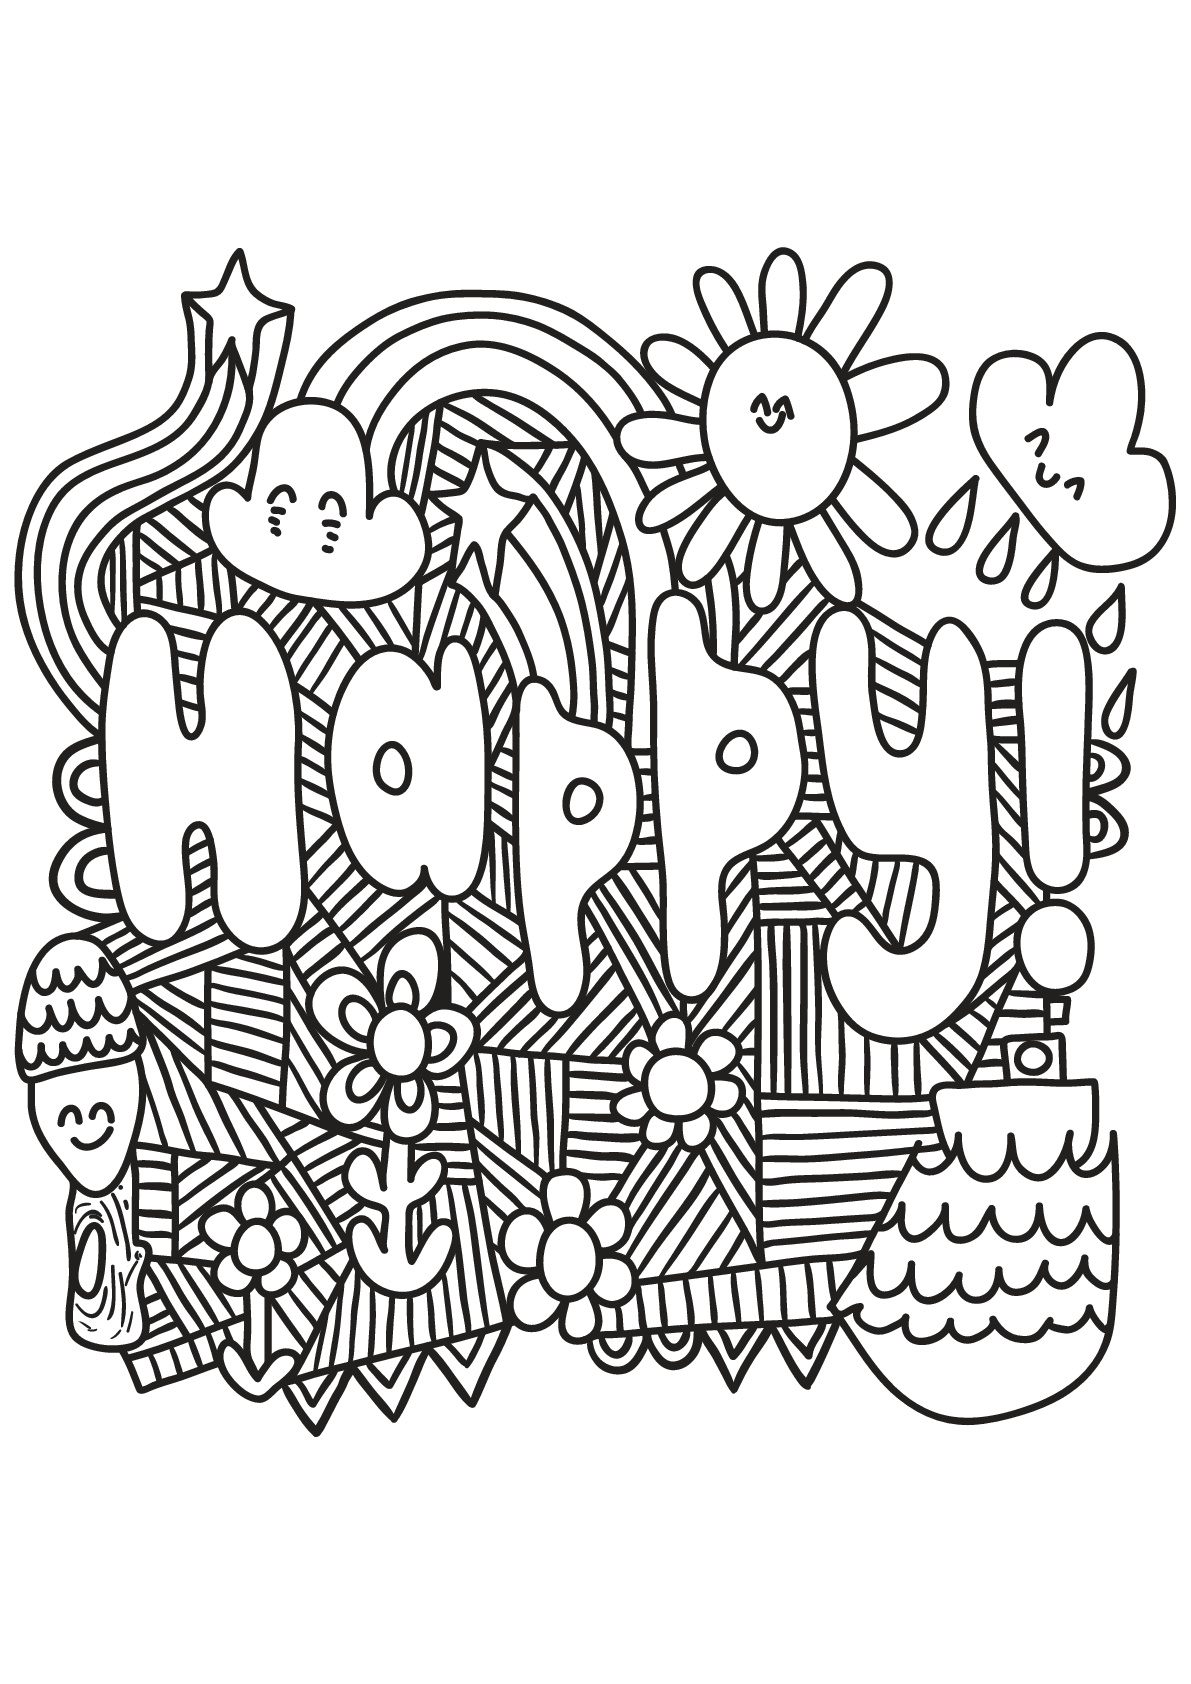 Free book quote 4 - Quotes Adult Coloring Pages